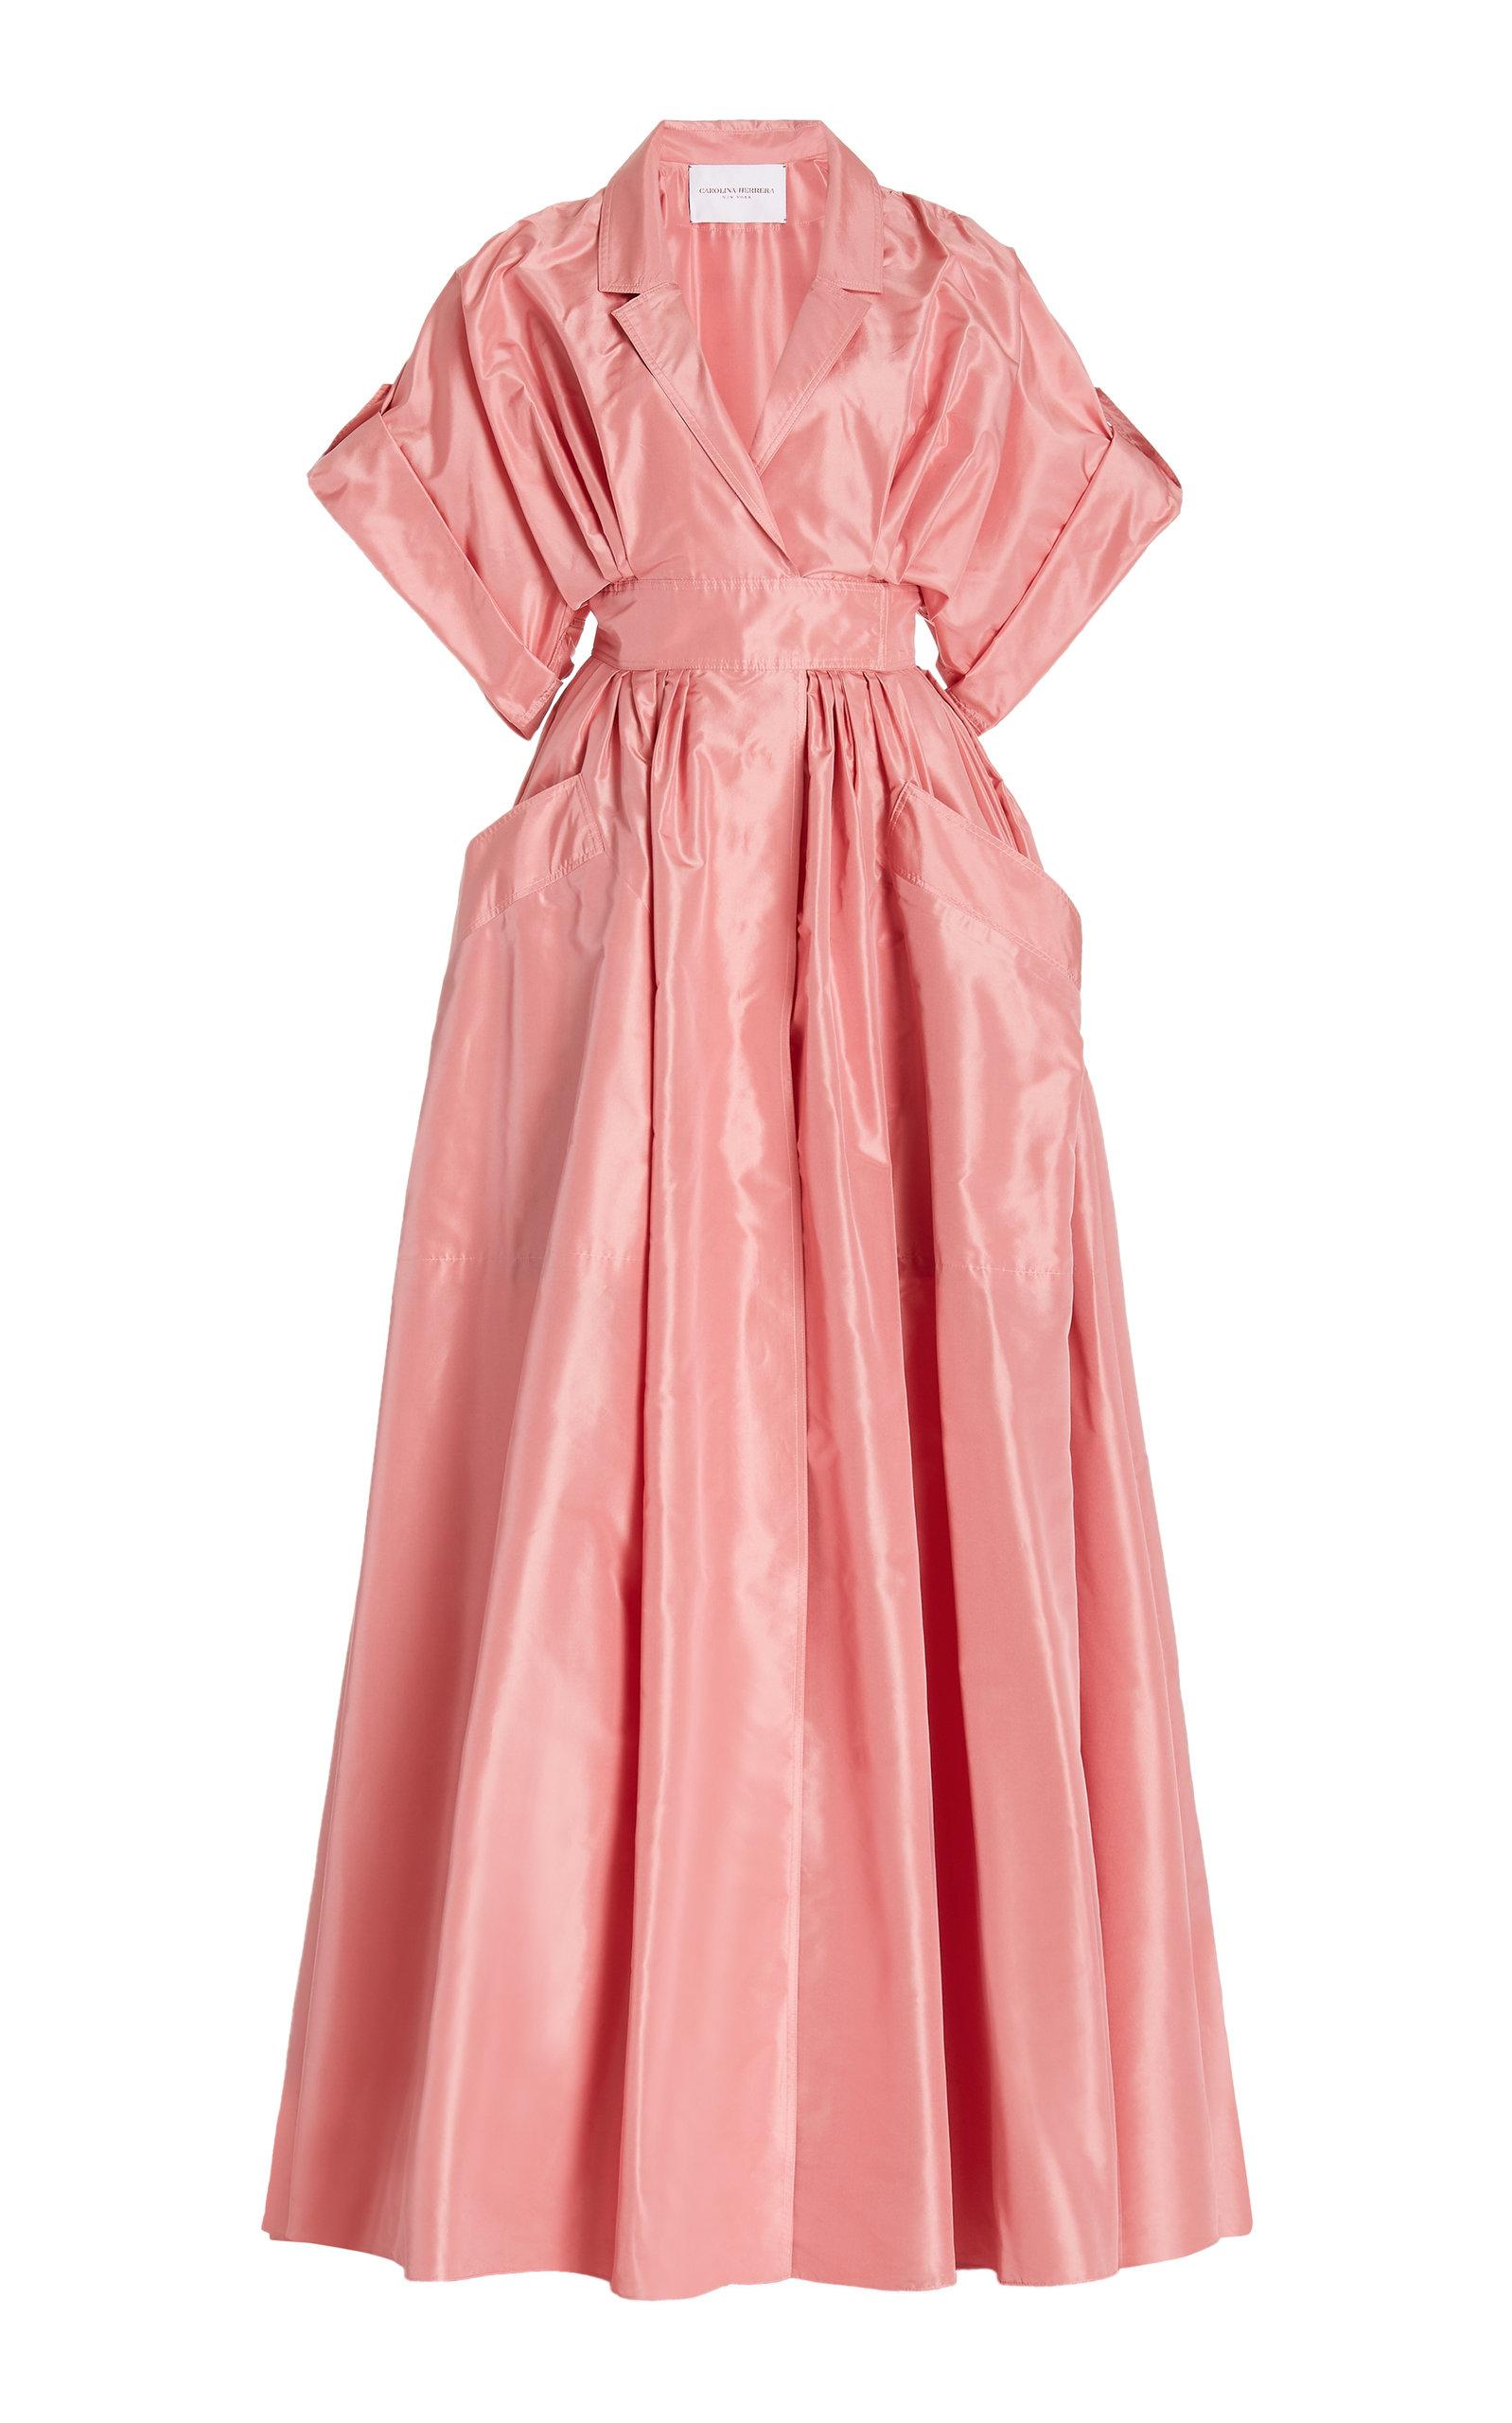 Taffeta Shirtdress Gown With Eyelet Sleeve and Collar | Formal dresses with  sleeves, Gowns dresses, Mother of the bride dresses long